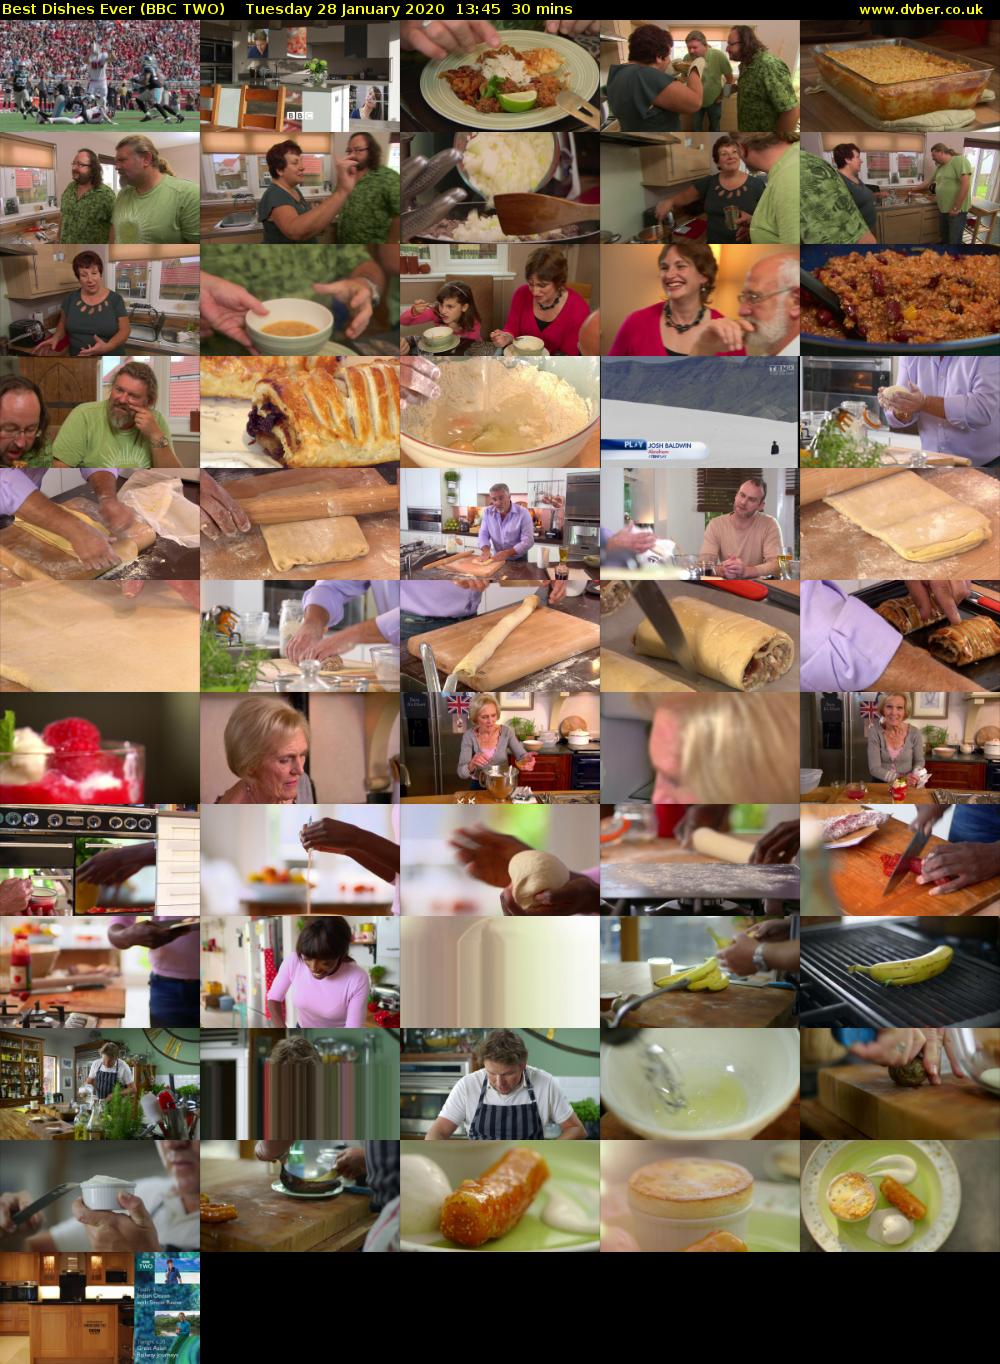 Best Dishes Ever (BBC TWO) Tuesday 28 January 2020 13:45 - 14:15